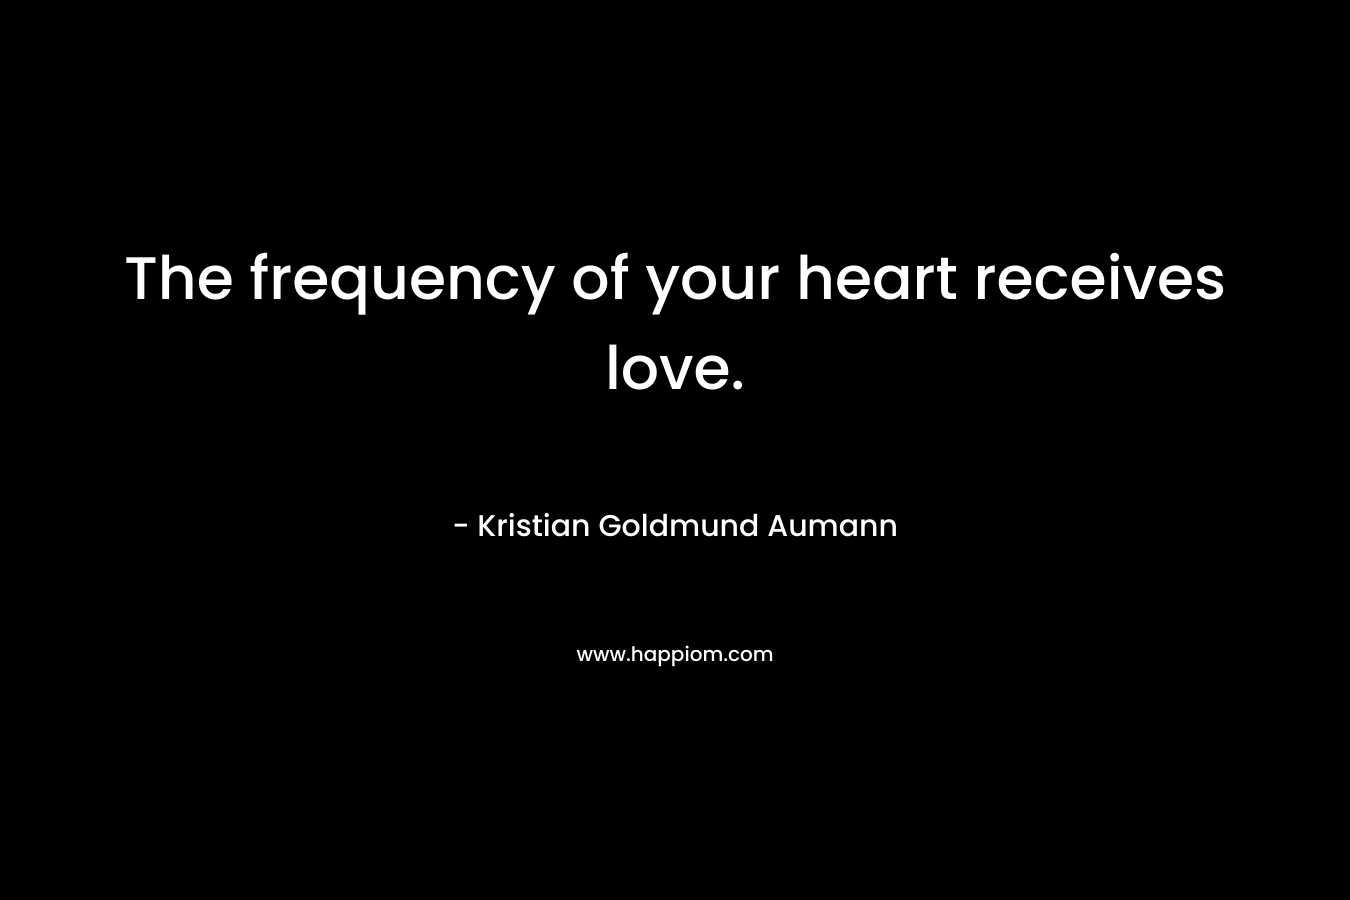 The frequency of your heart receives love. – Kristian Goldmund Aumann